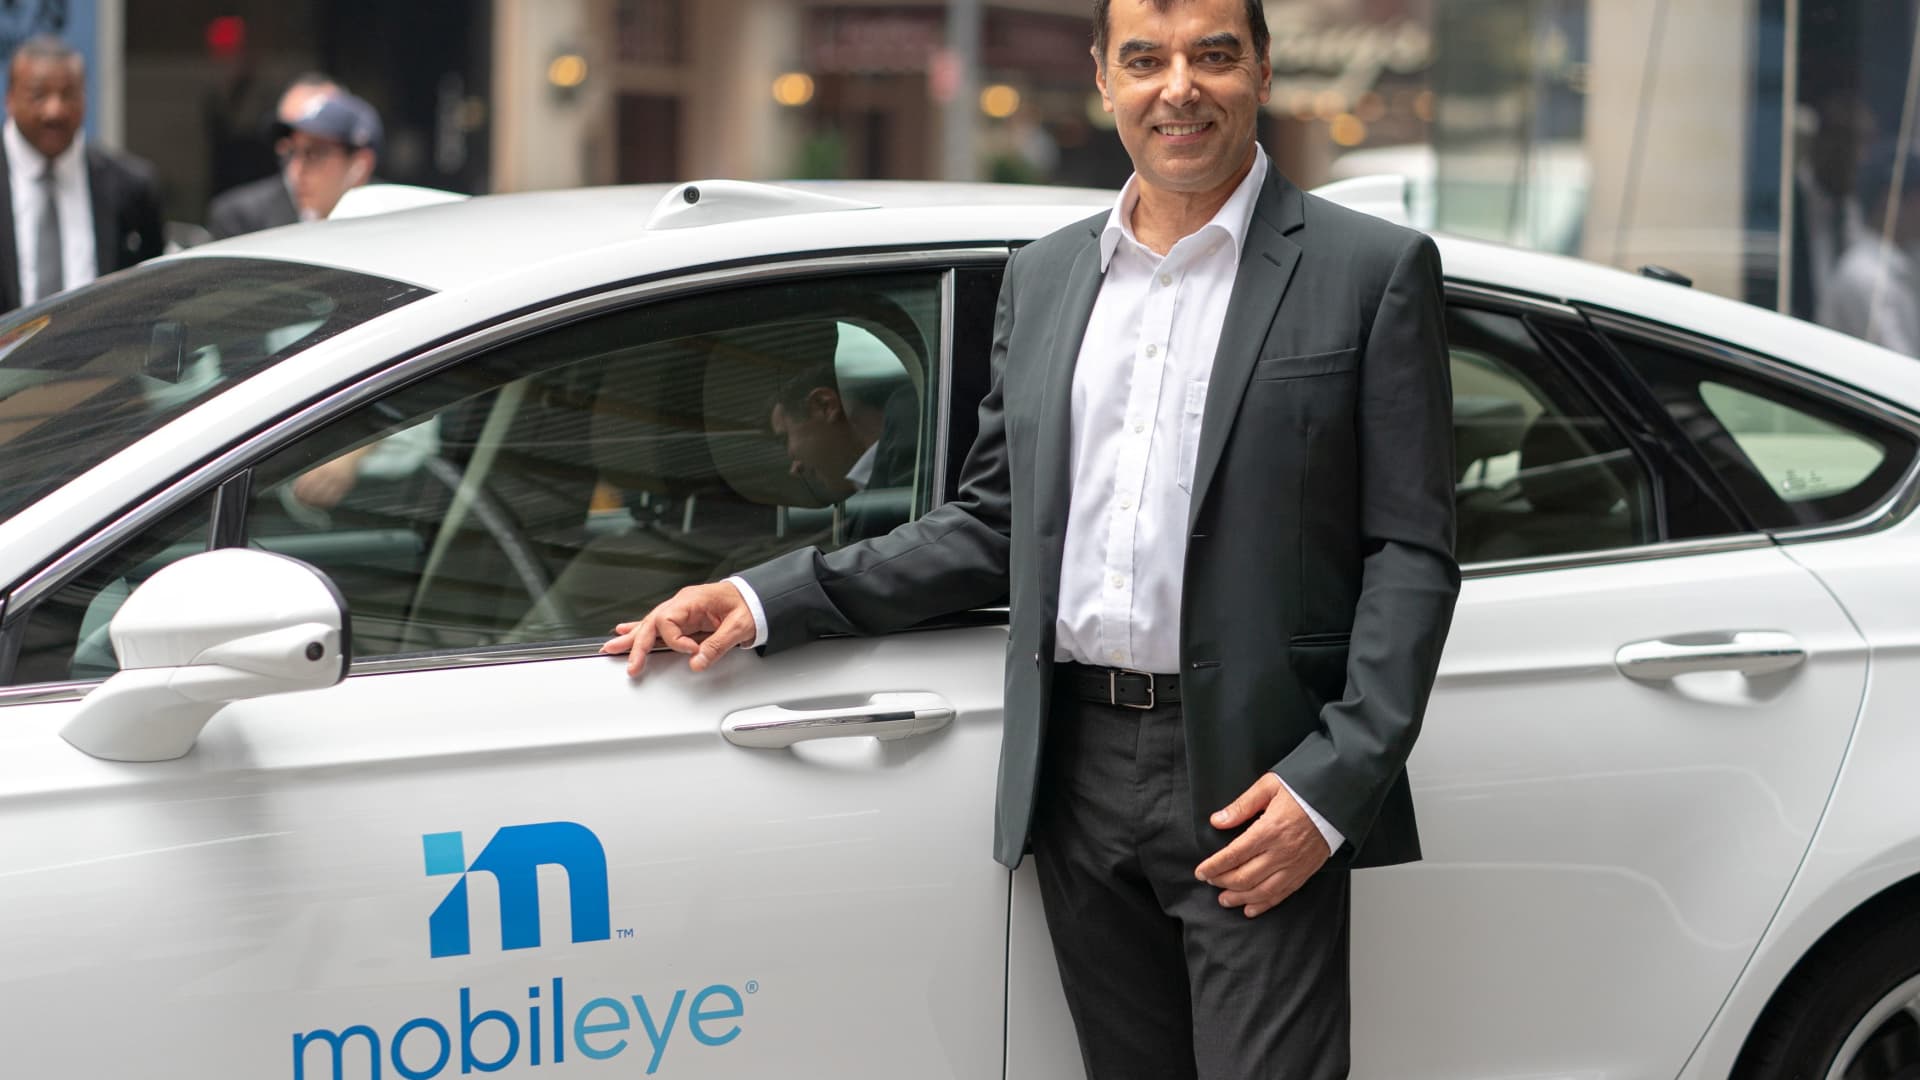 Intel’s self-driving car division Mobileye files for IPO